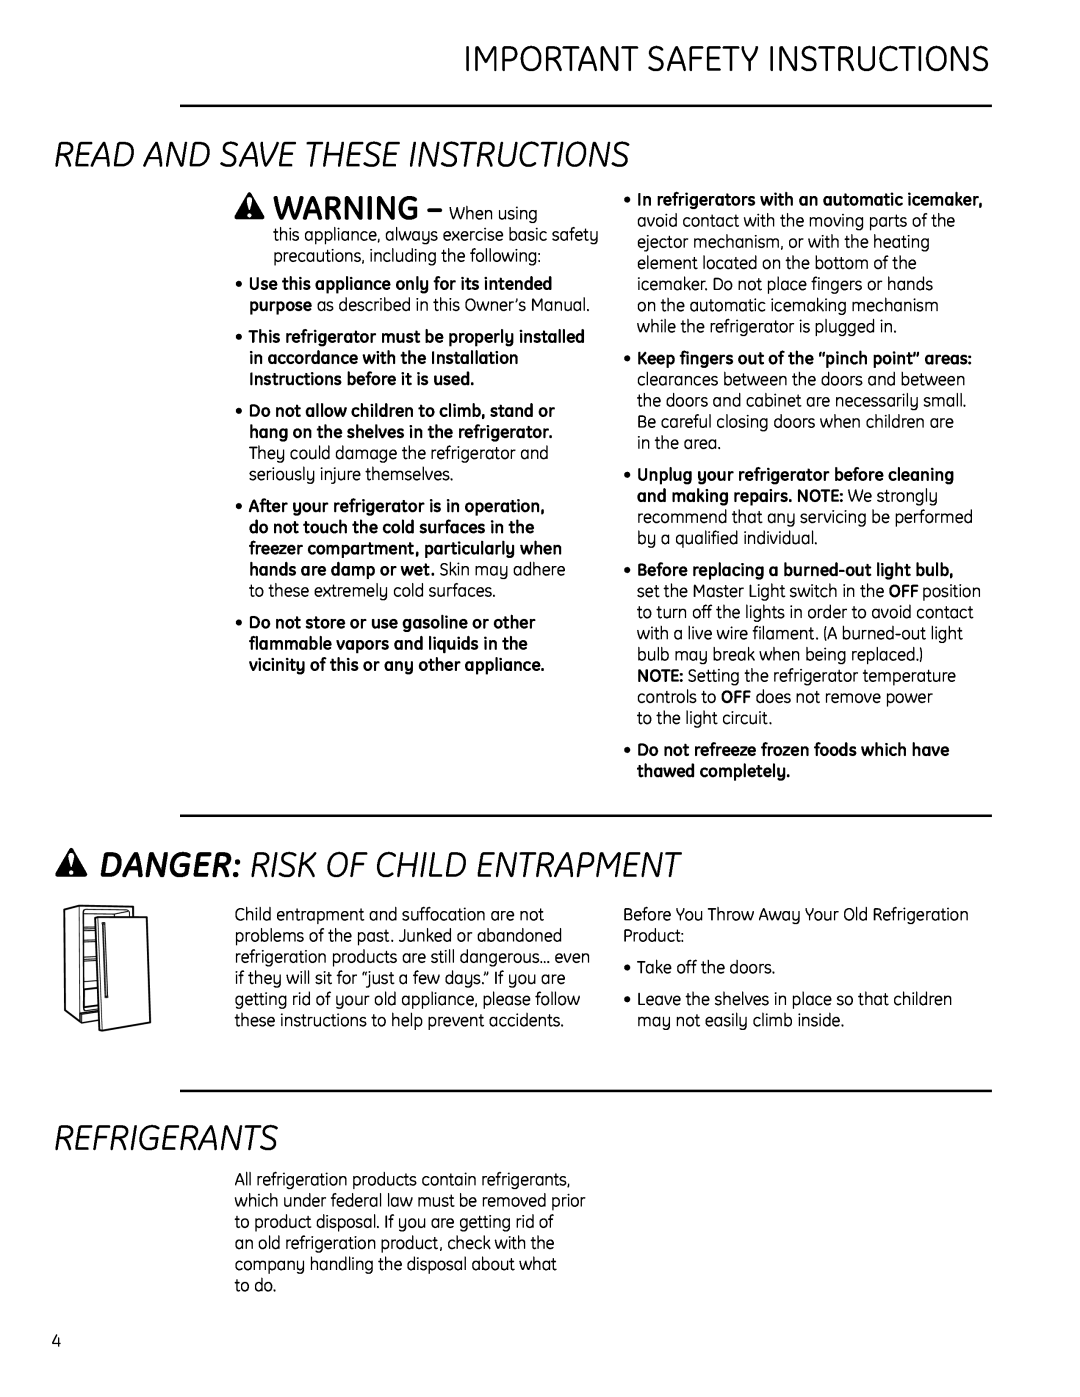 GE Monogram Side-by-Side Built-In Refrigerators Important Safety Instructions, Read And Save These Instructions 